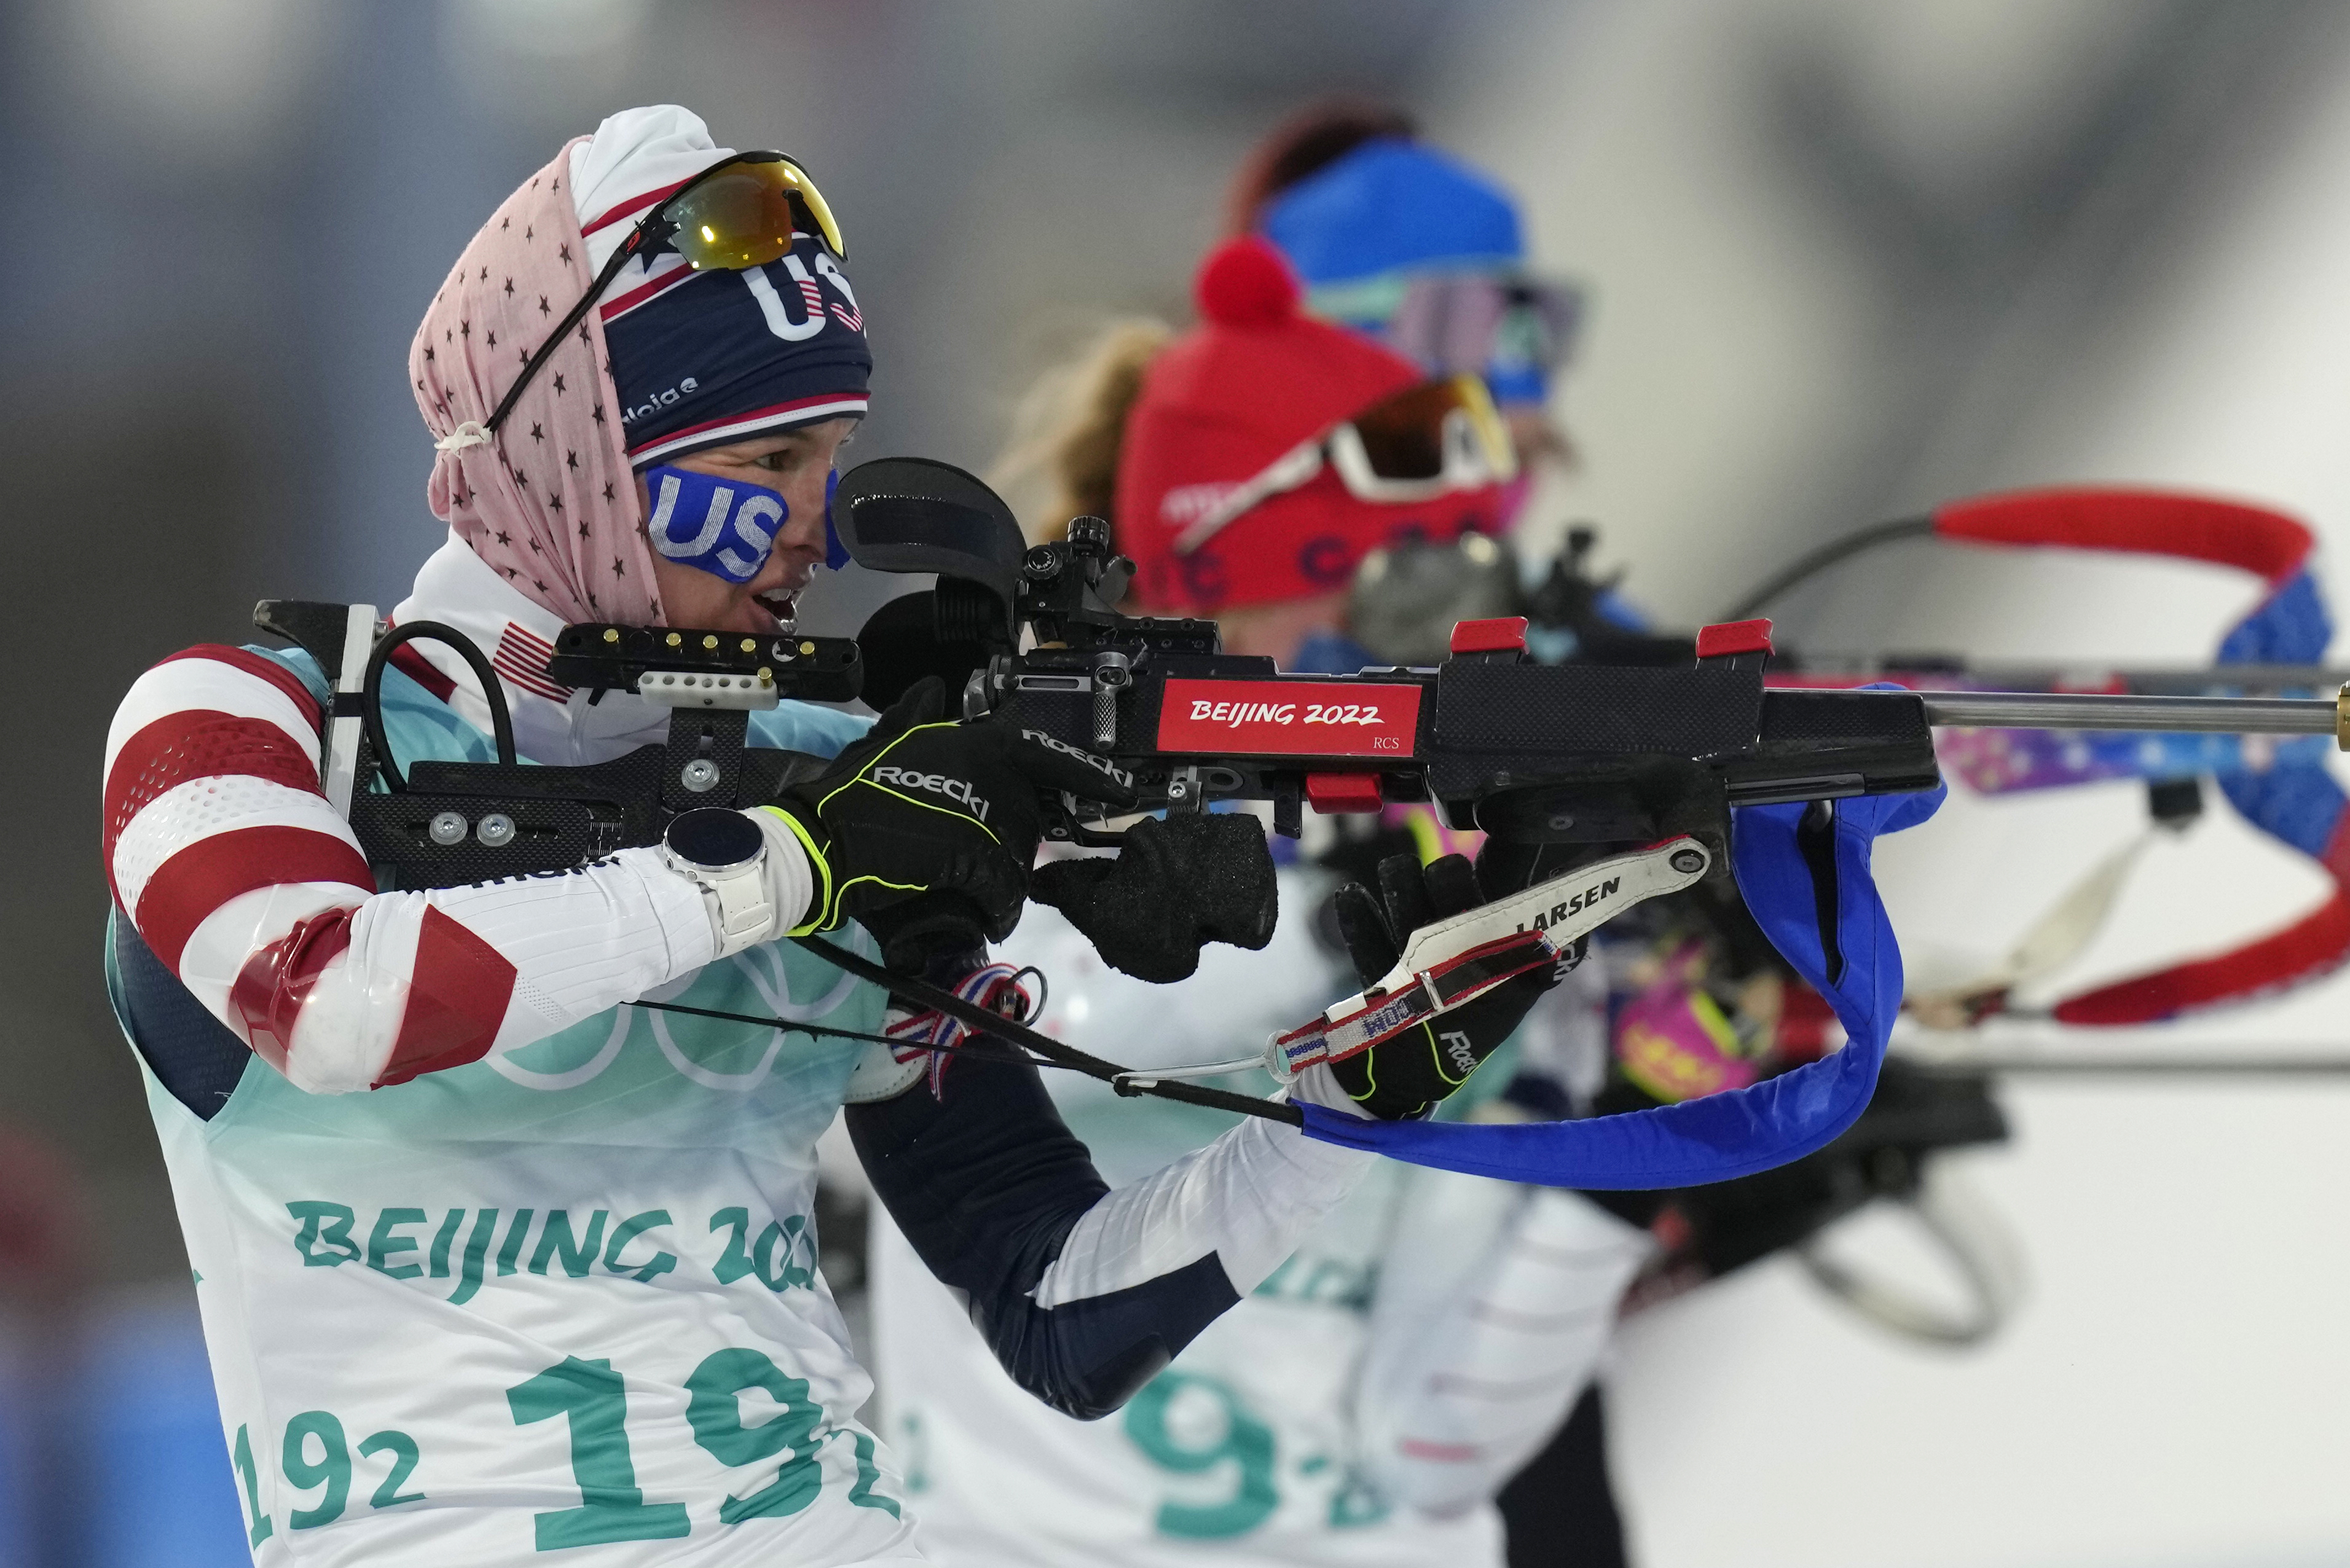 Team USA Finishes 7th in Mixed Relay Biathlon